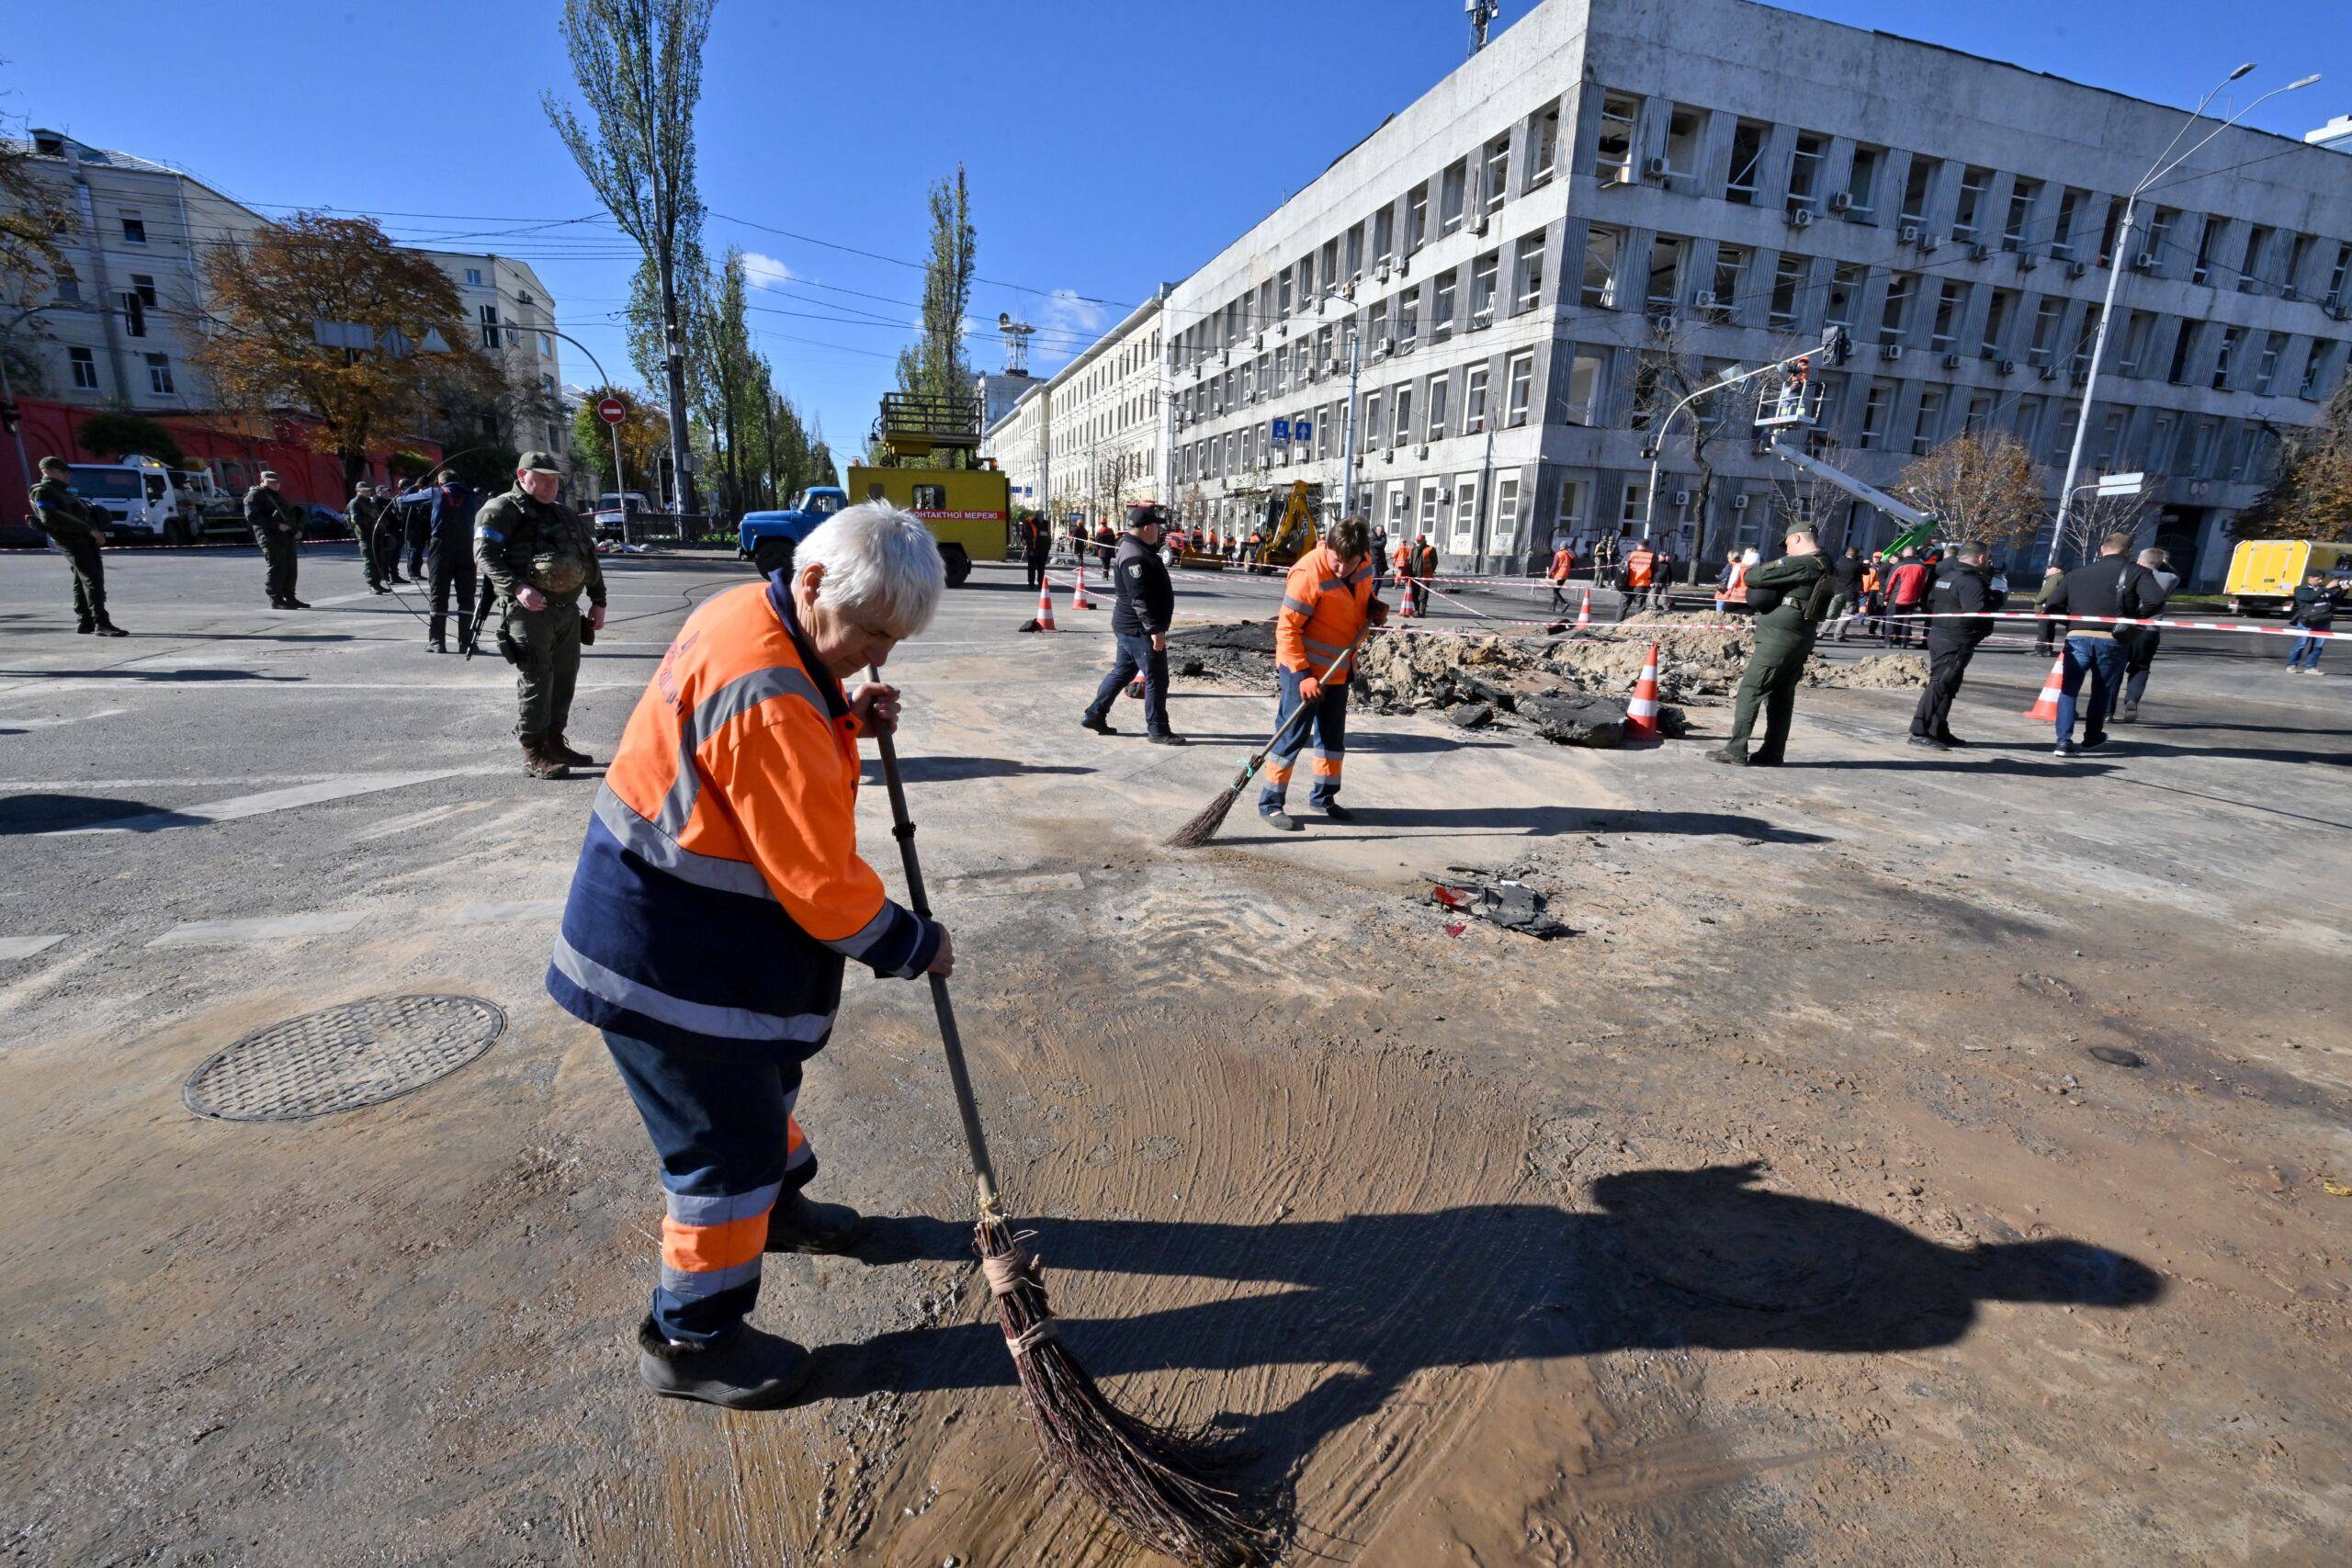 City workers clean the asphalt next to a rocket crater in central Kyiv on October 10, 2022 after Ukraine's capital was hit by multiple Russian strikes early on today, the first since late June. - The head of the Ukrainian military said that Russian forces launched at least 75 missiles at Ukraine, with fatal strikes targeting the capital Kyiv, and cities in the south and west. (Photo by Sergei SUPINSKY / AFP)